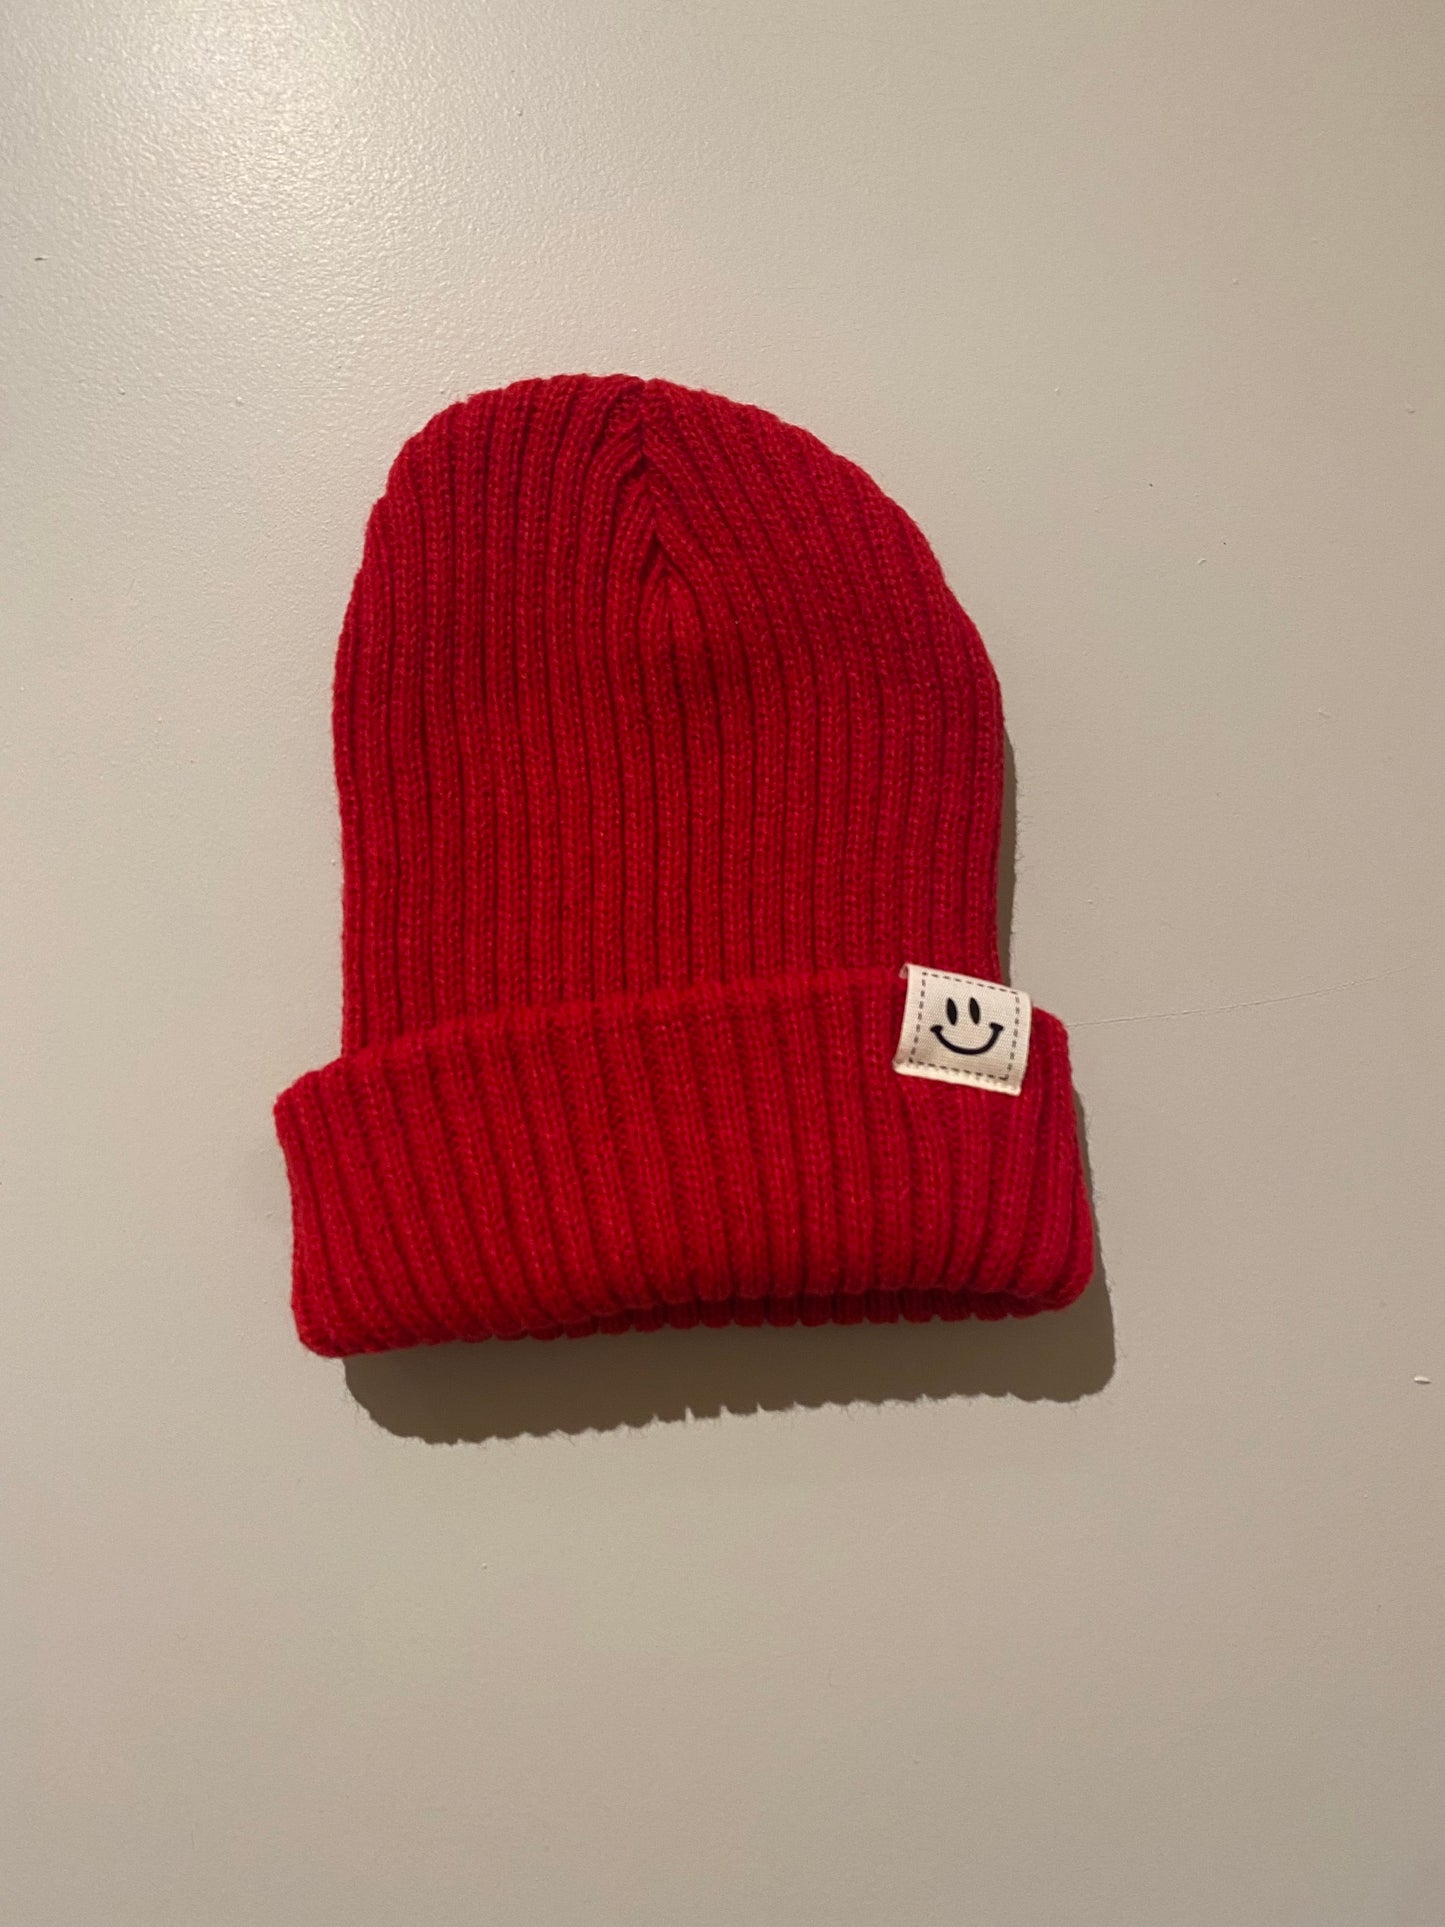 Chunky Smile Beanie - Bright Red